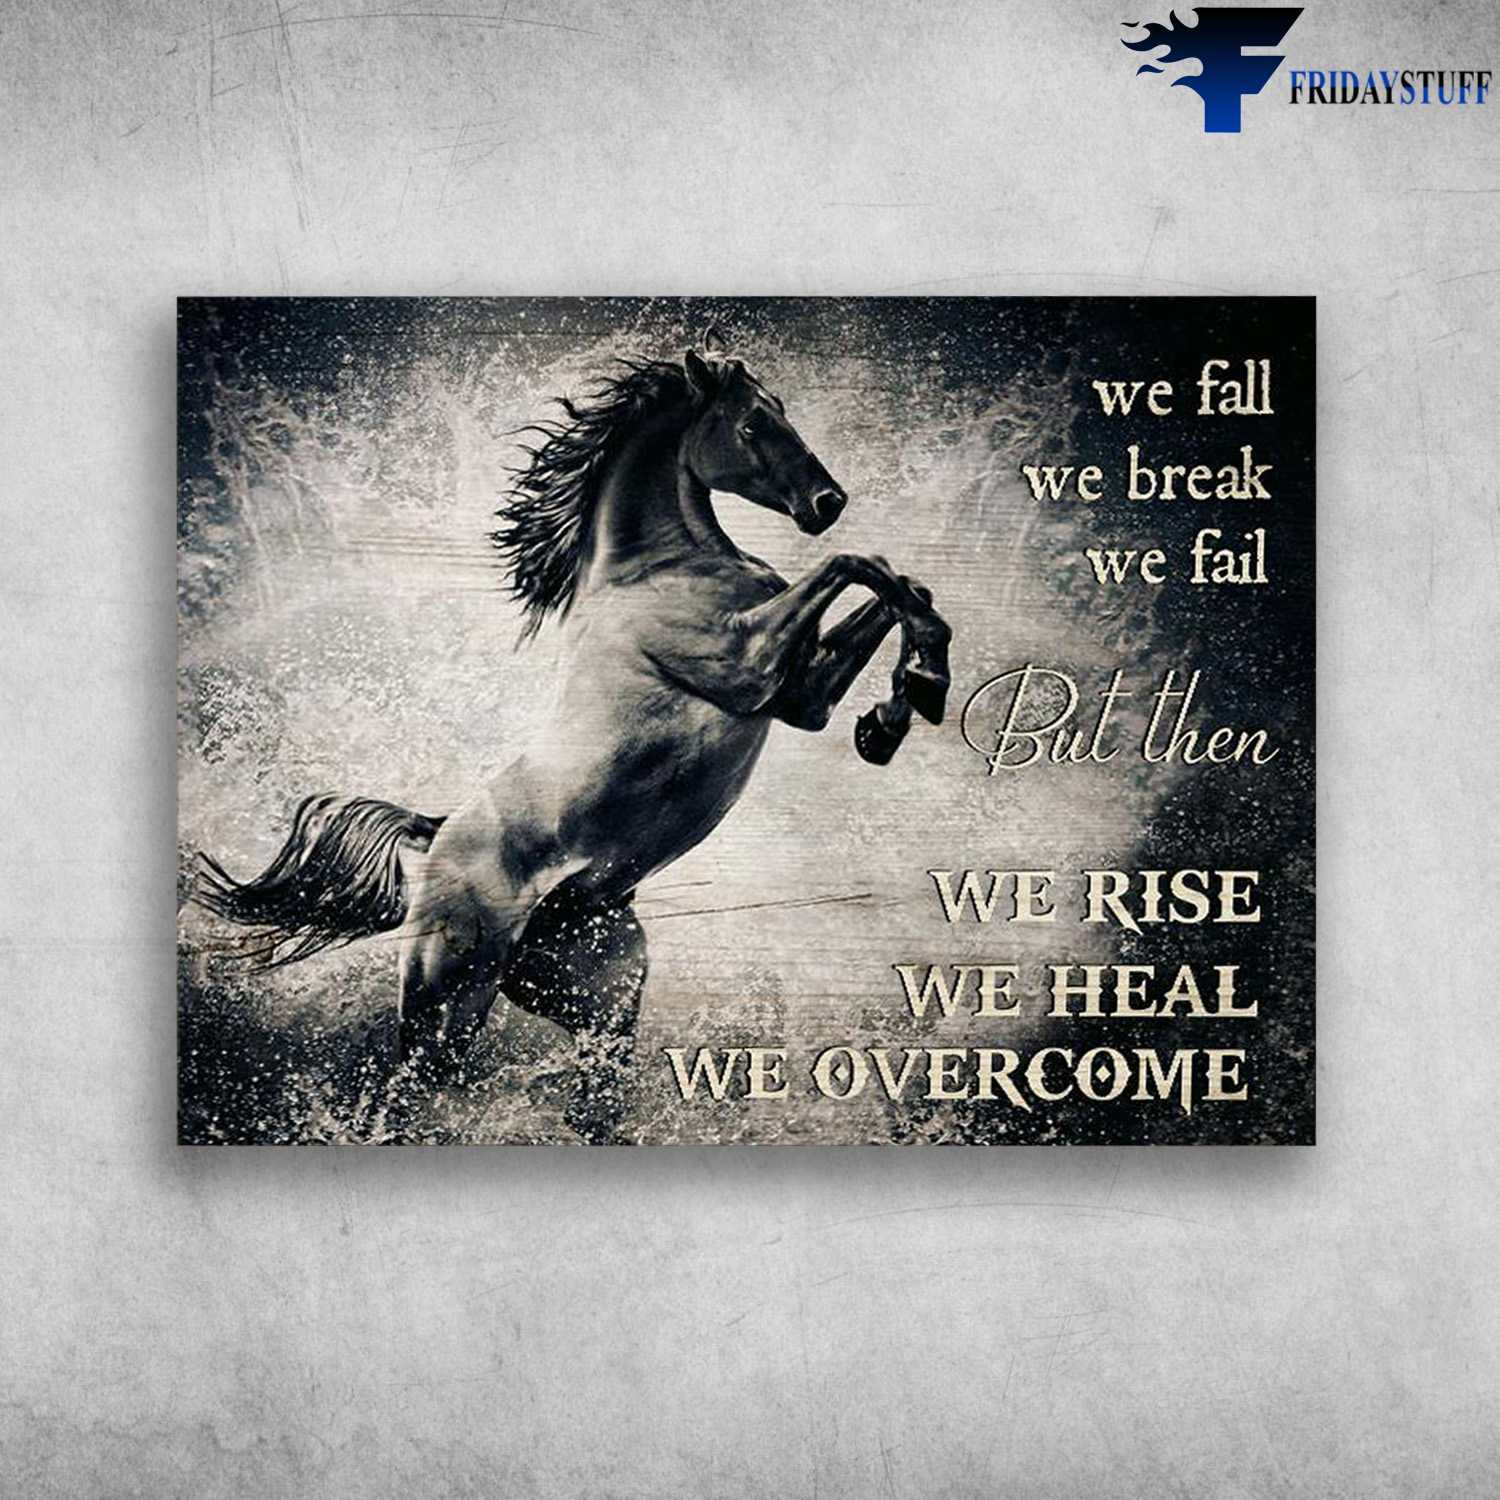 Horse Riding, Horse Poster - We Fall, We Break, We Fail, But Then, We Rise, We Heal, We Overcome